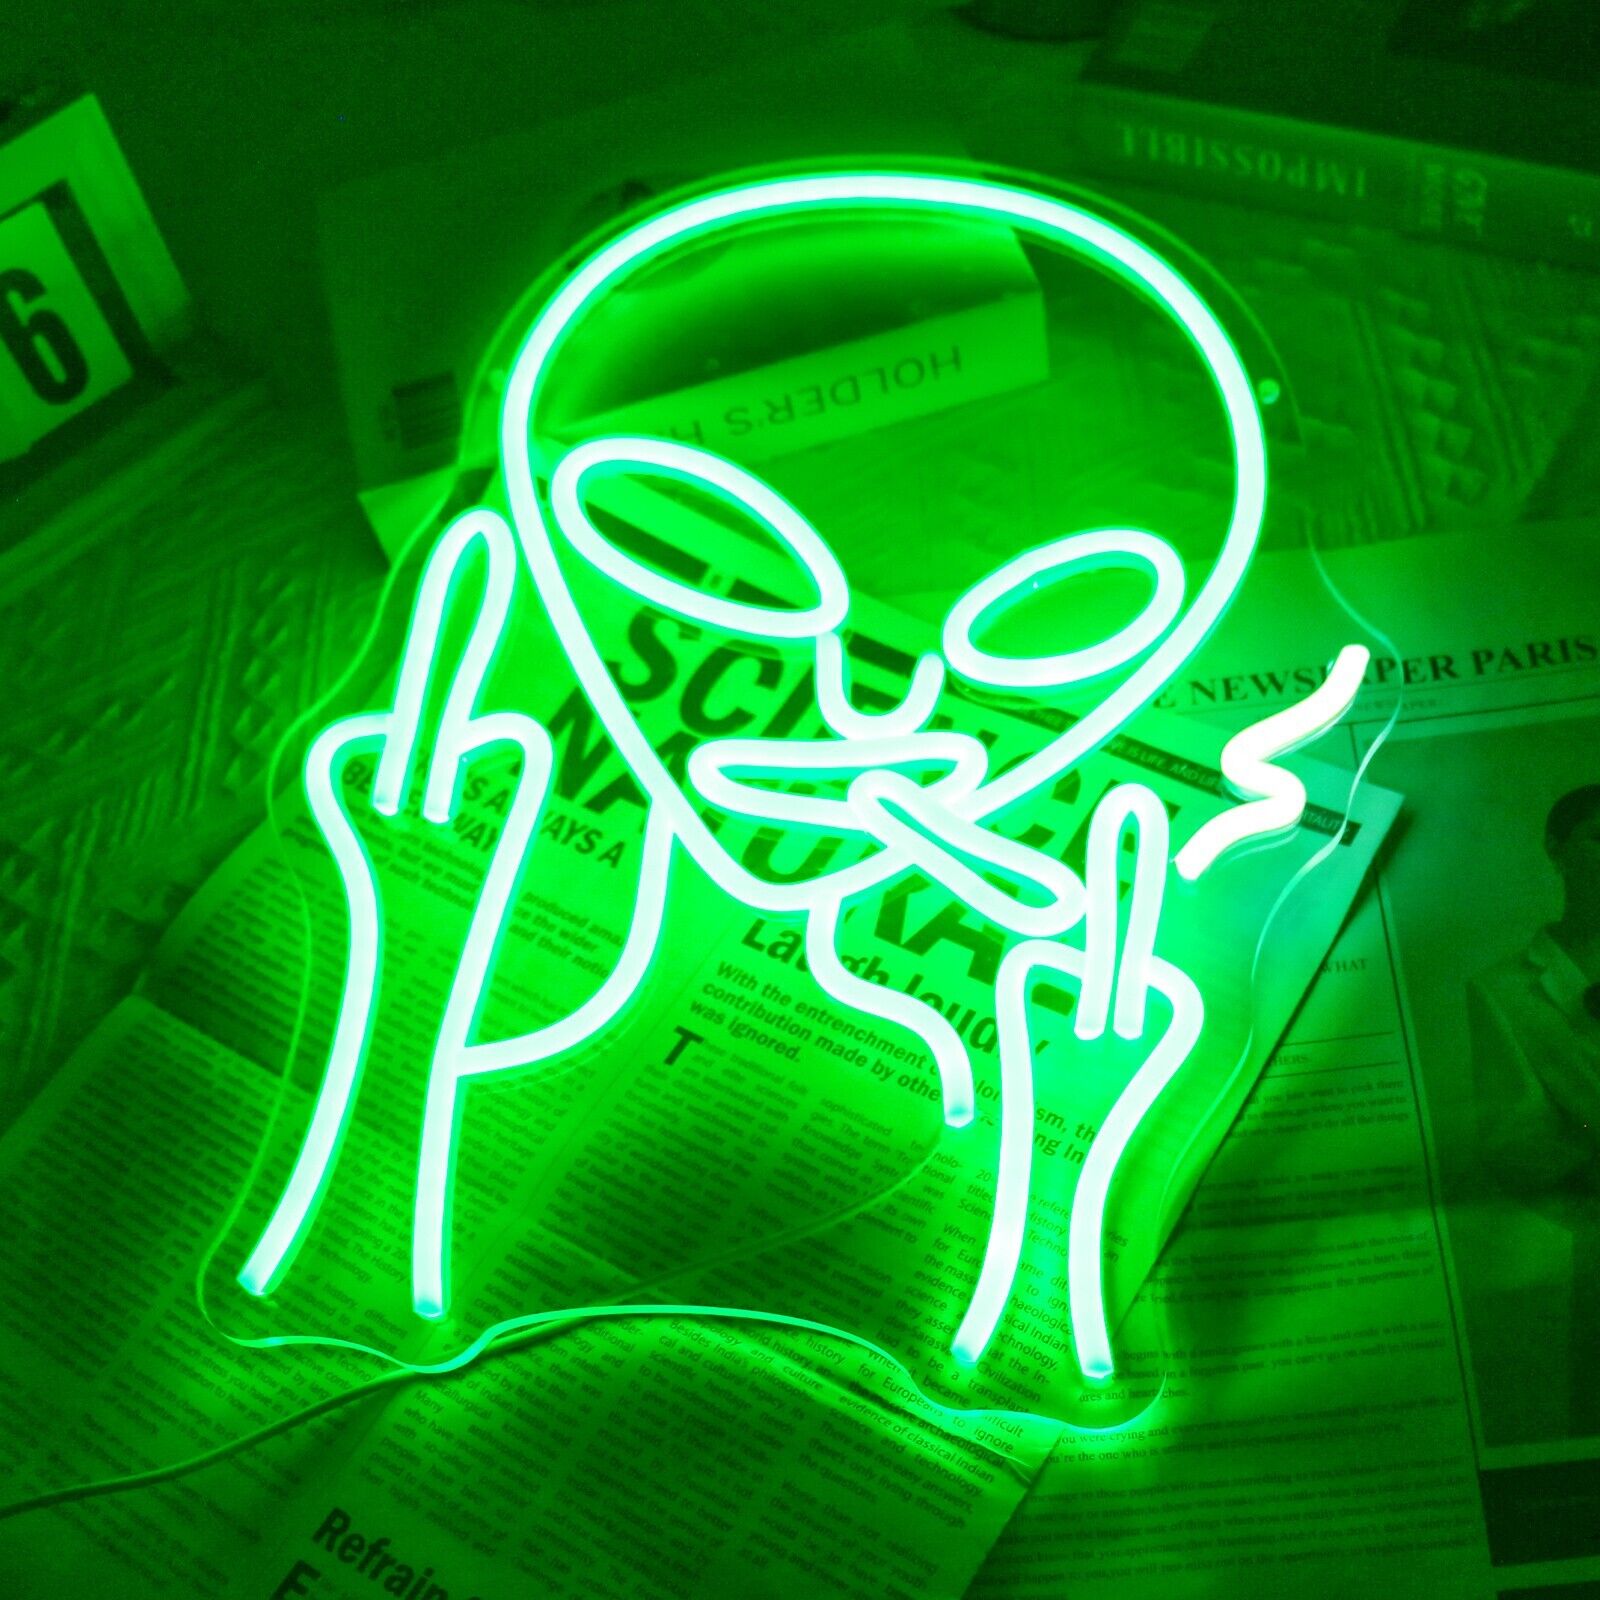 LED Alien Neon Sign: Green Aesthetic Room Wall Decor for Bedroom Bar Party (USB)